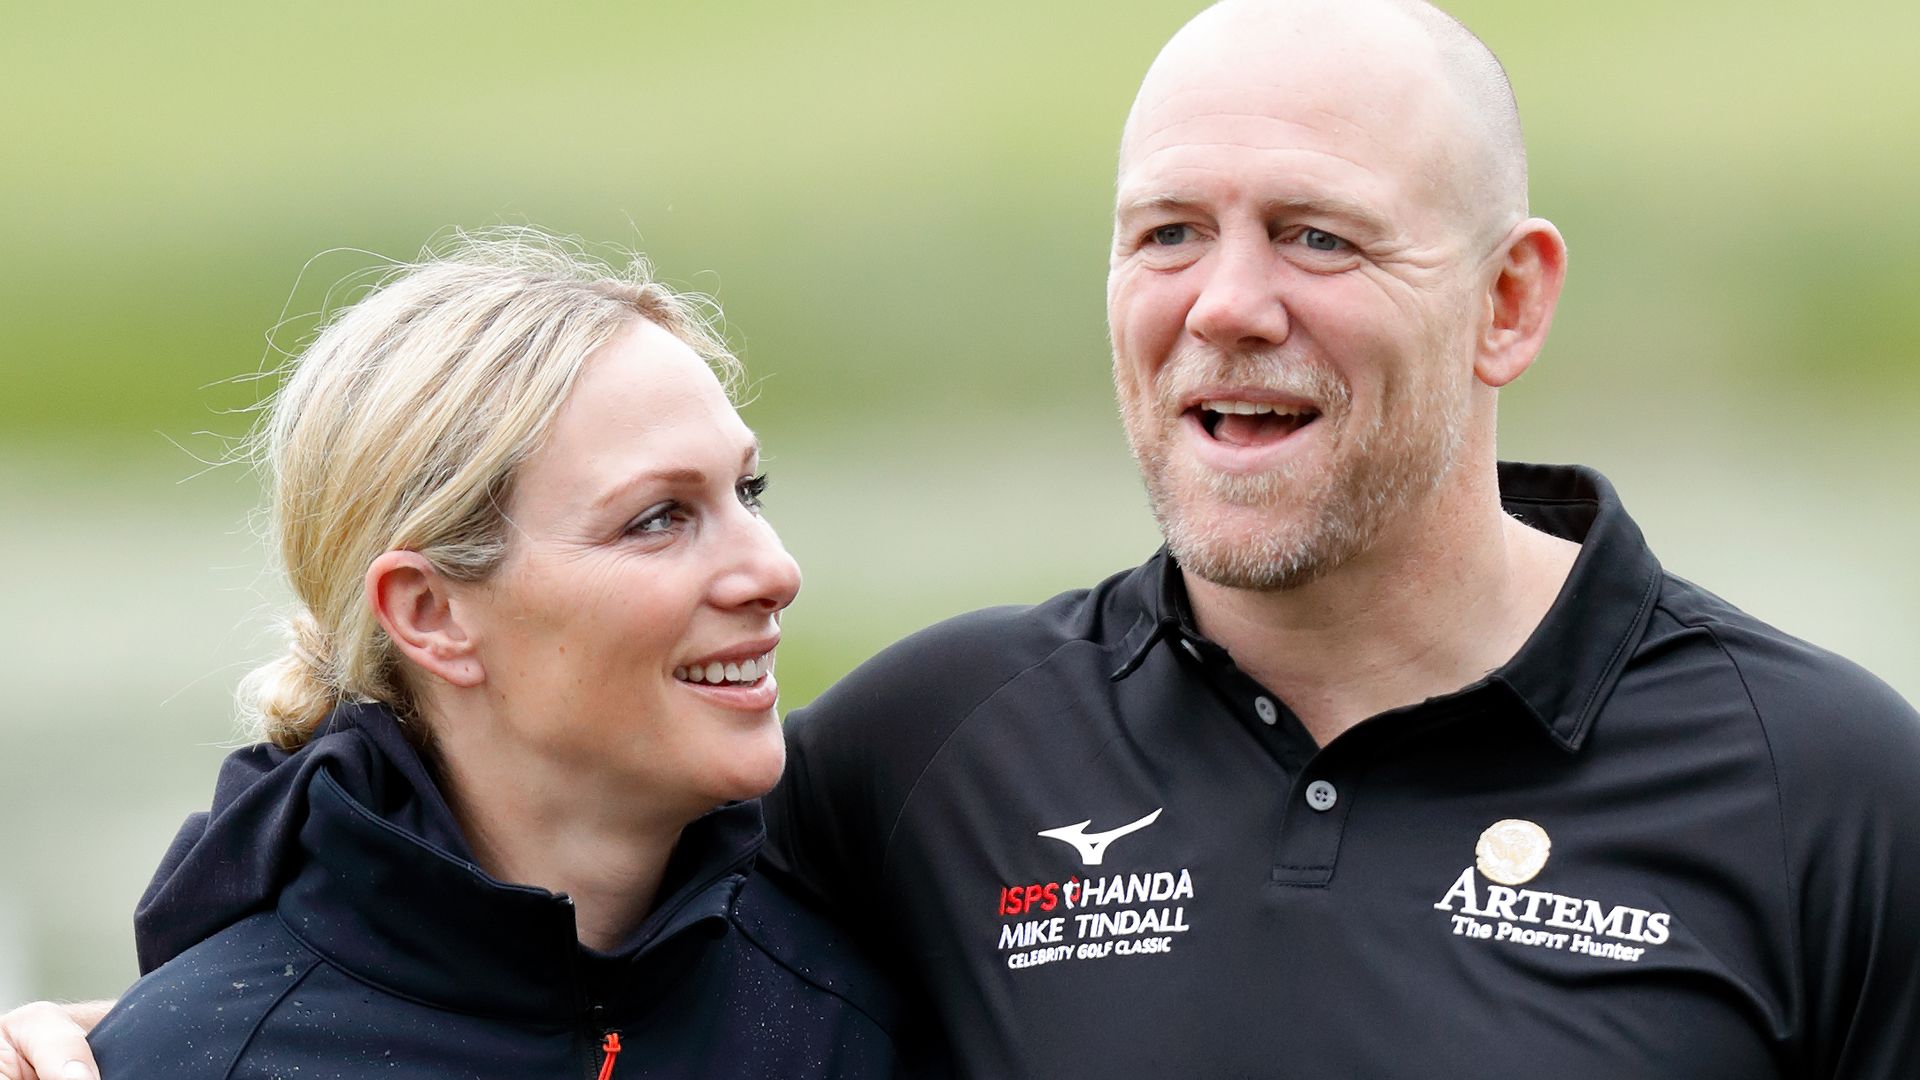 Zara Tindall in a jacket looking at Mike Tindall in a polo shirt and colourful trousers